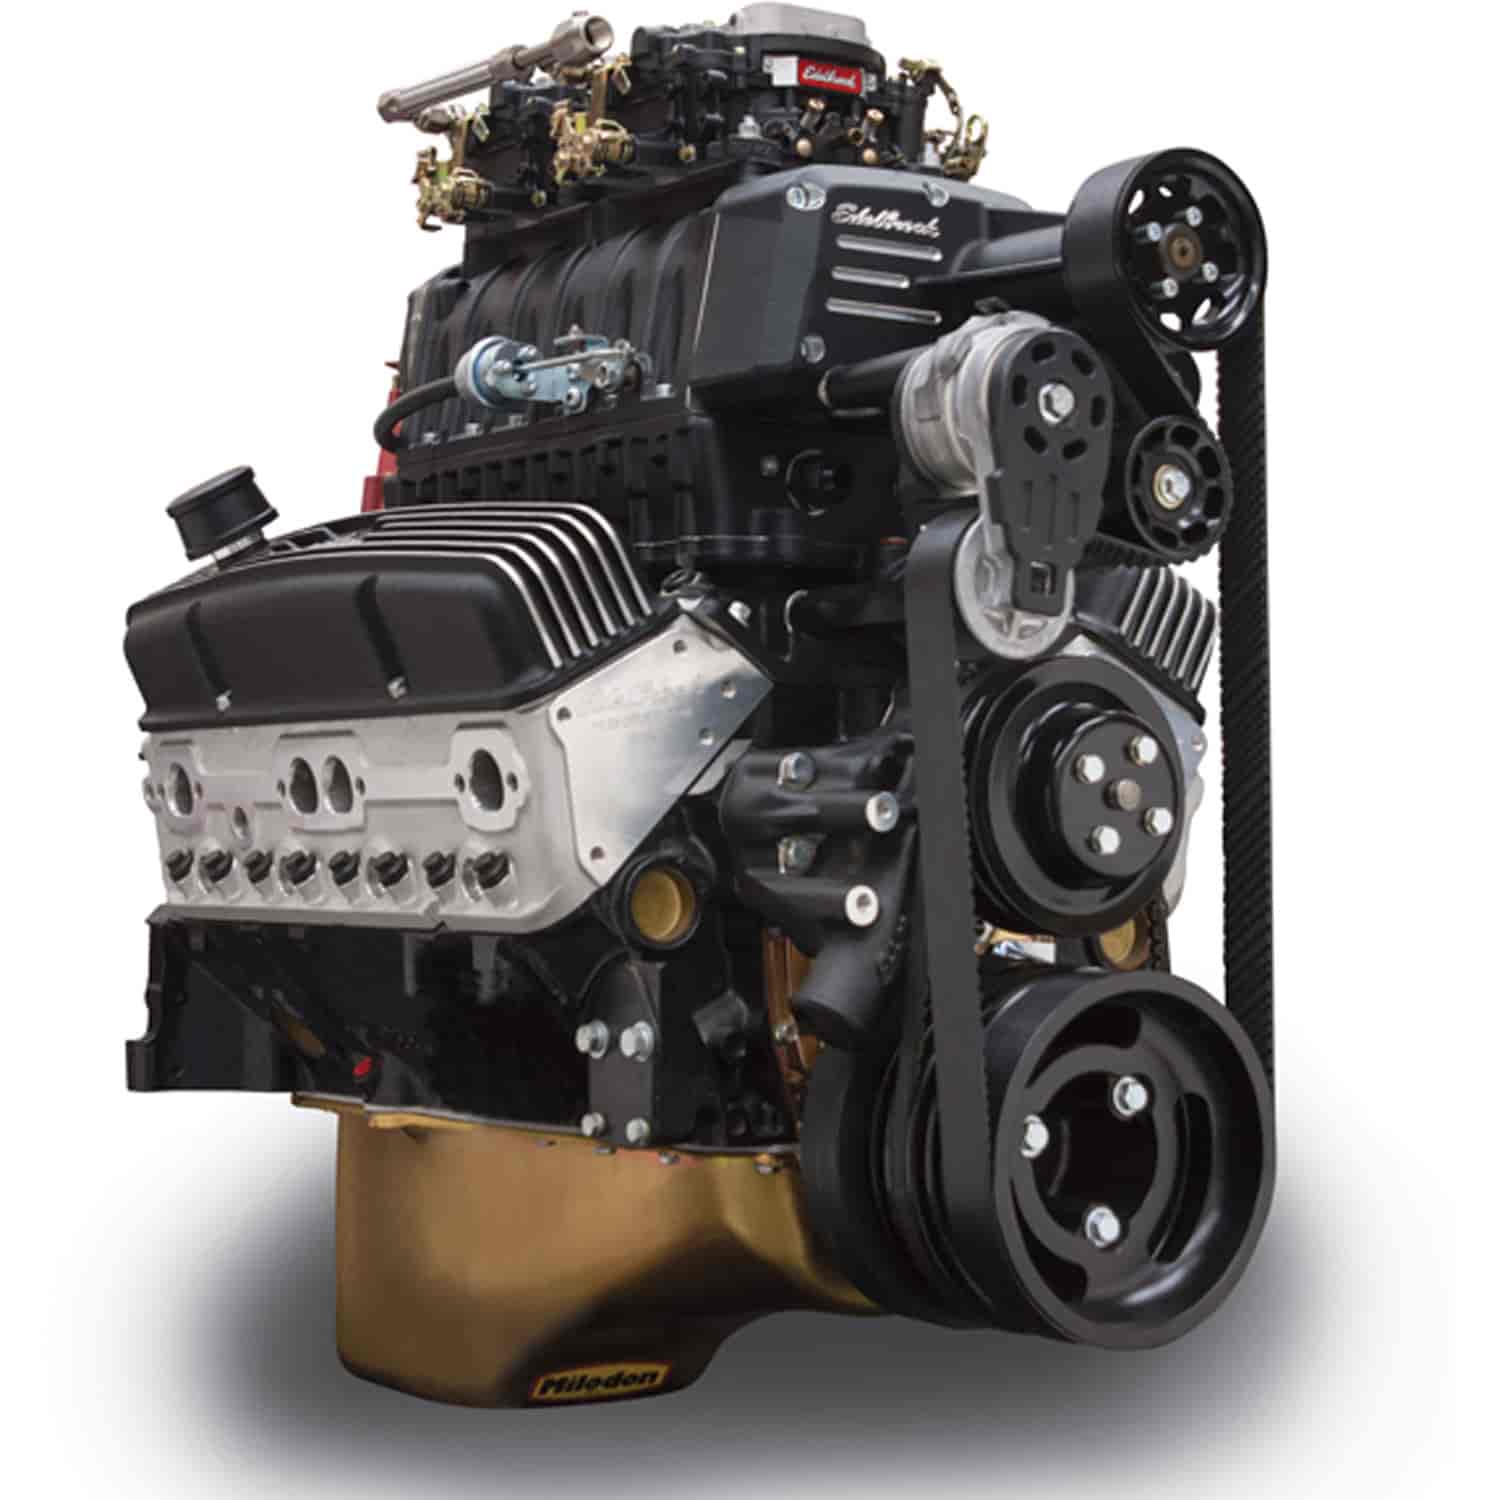 E-Force RPM Supercharged Small Block Chevy 350 Black Crate Engine Carbureted